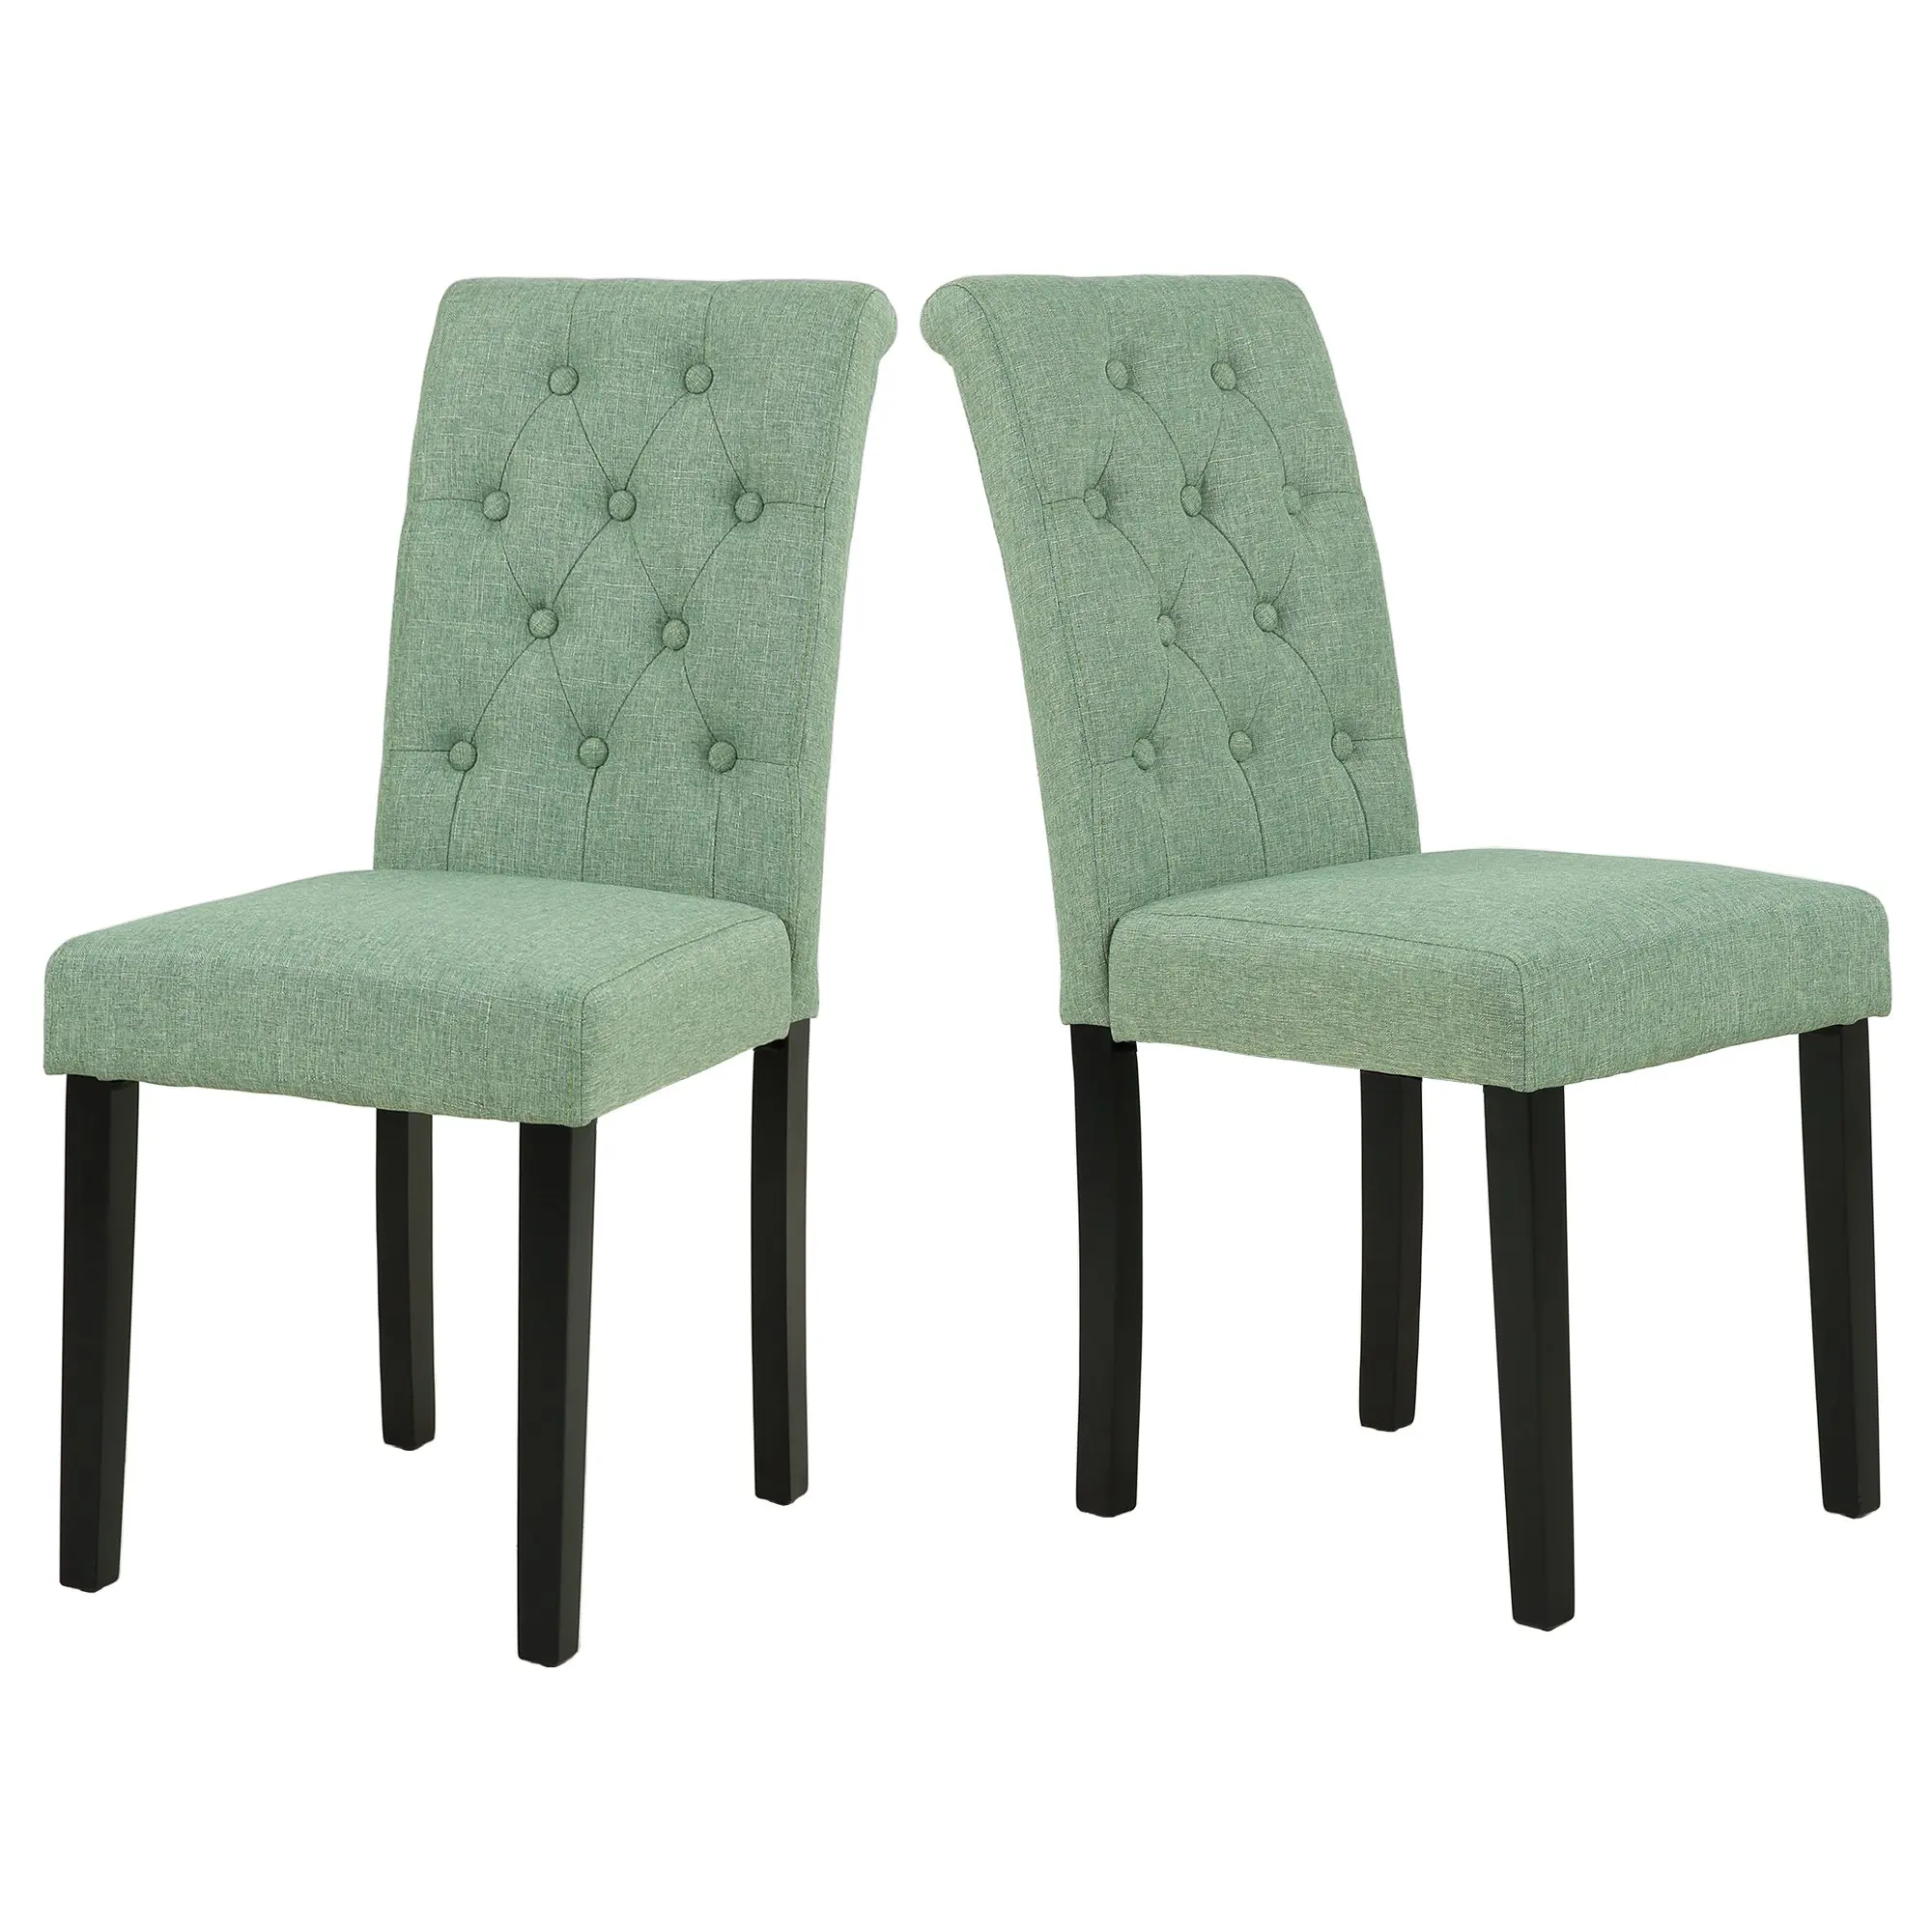 Cheap Olive Green Dining Chairs, find Olive Green Dining Chairs deals